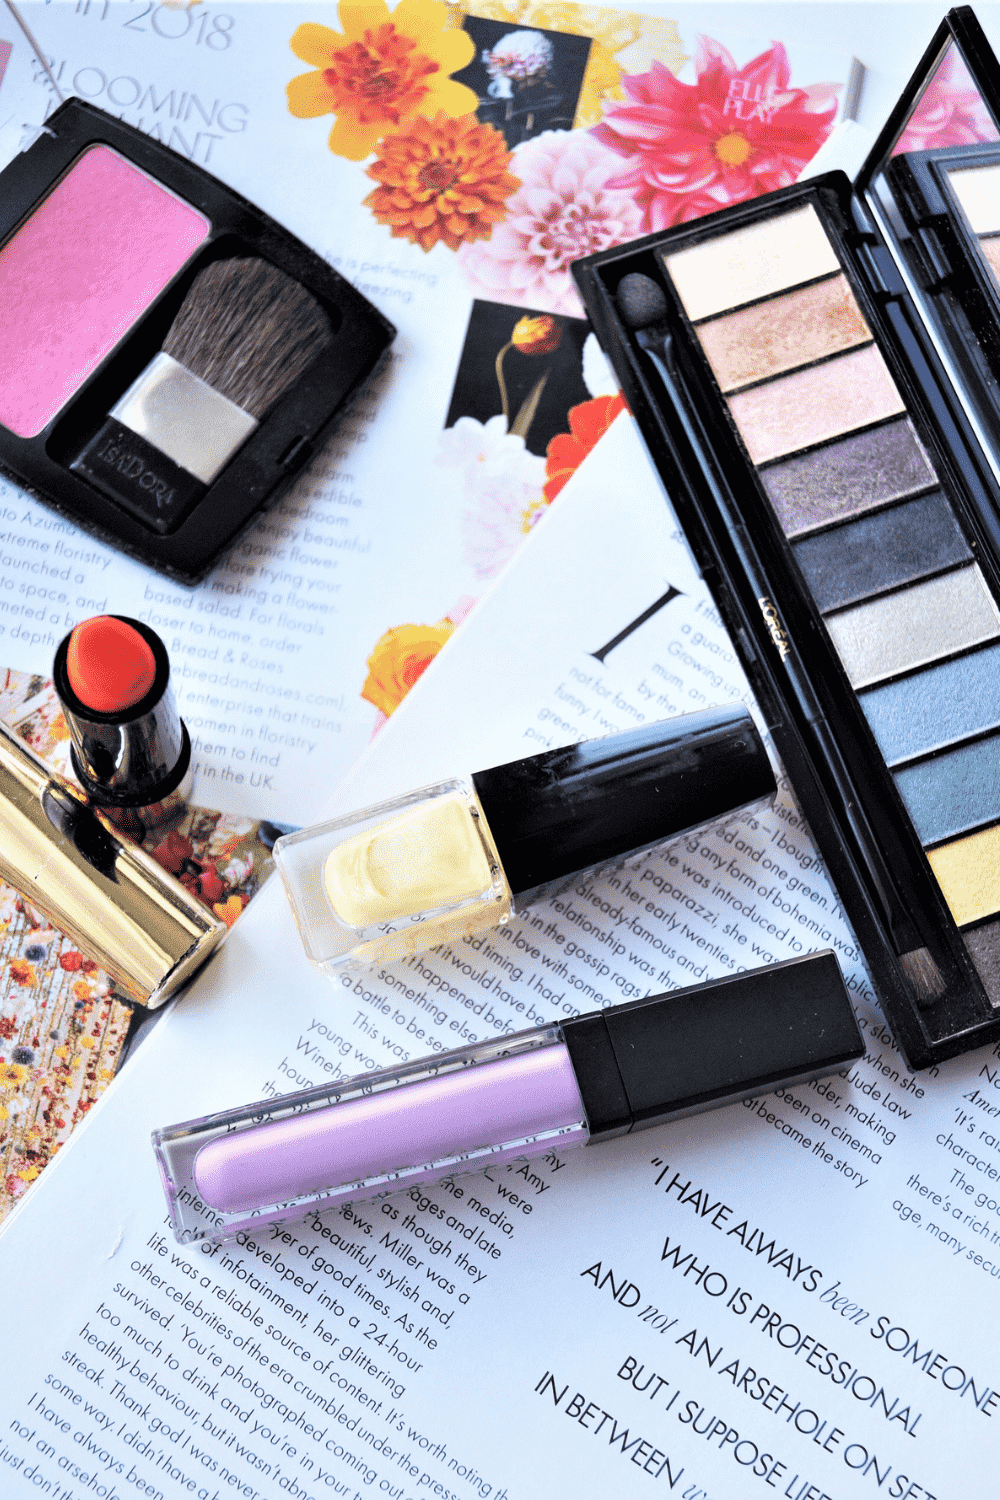 2021 makeup trends that are worth trying